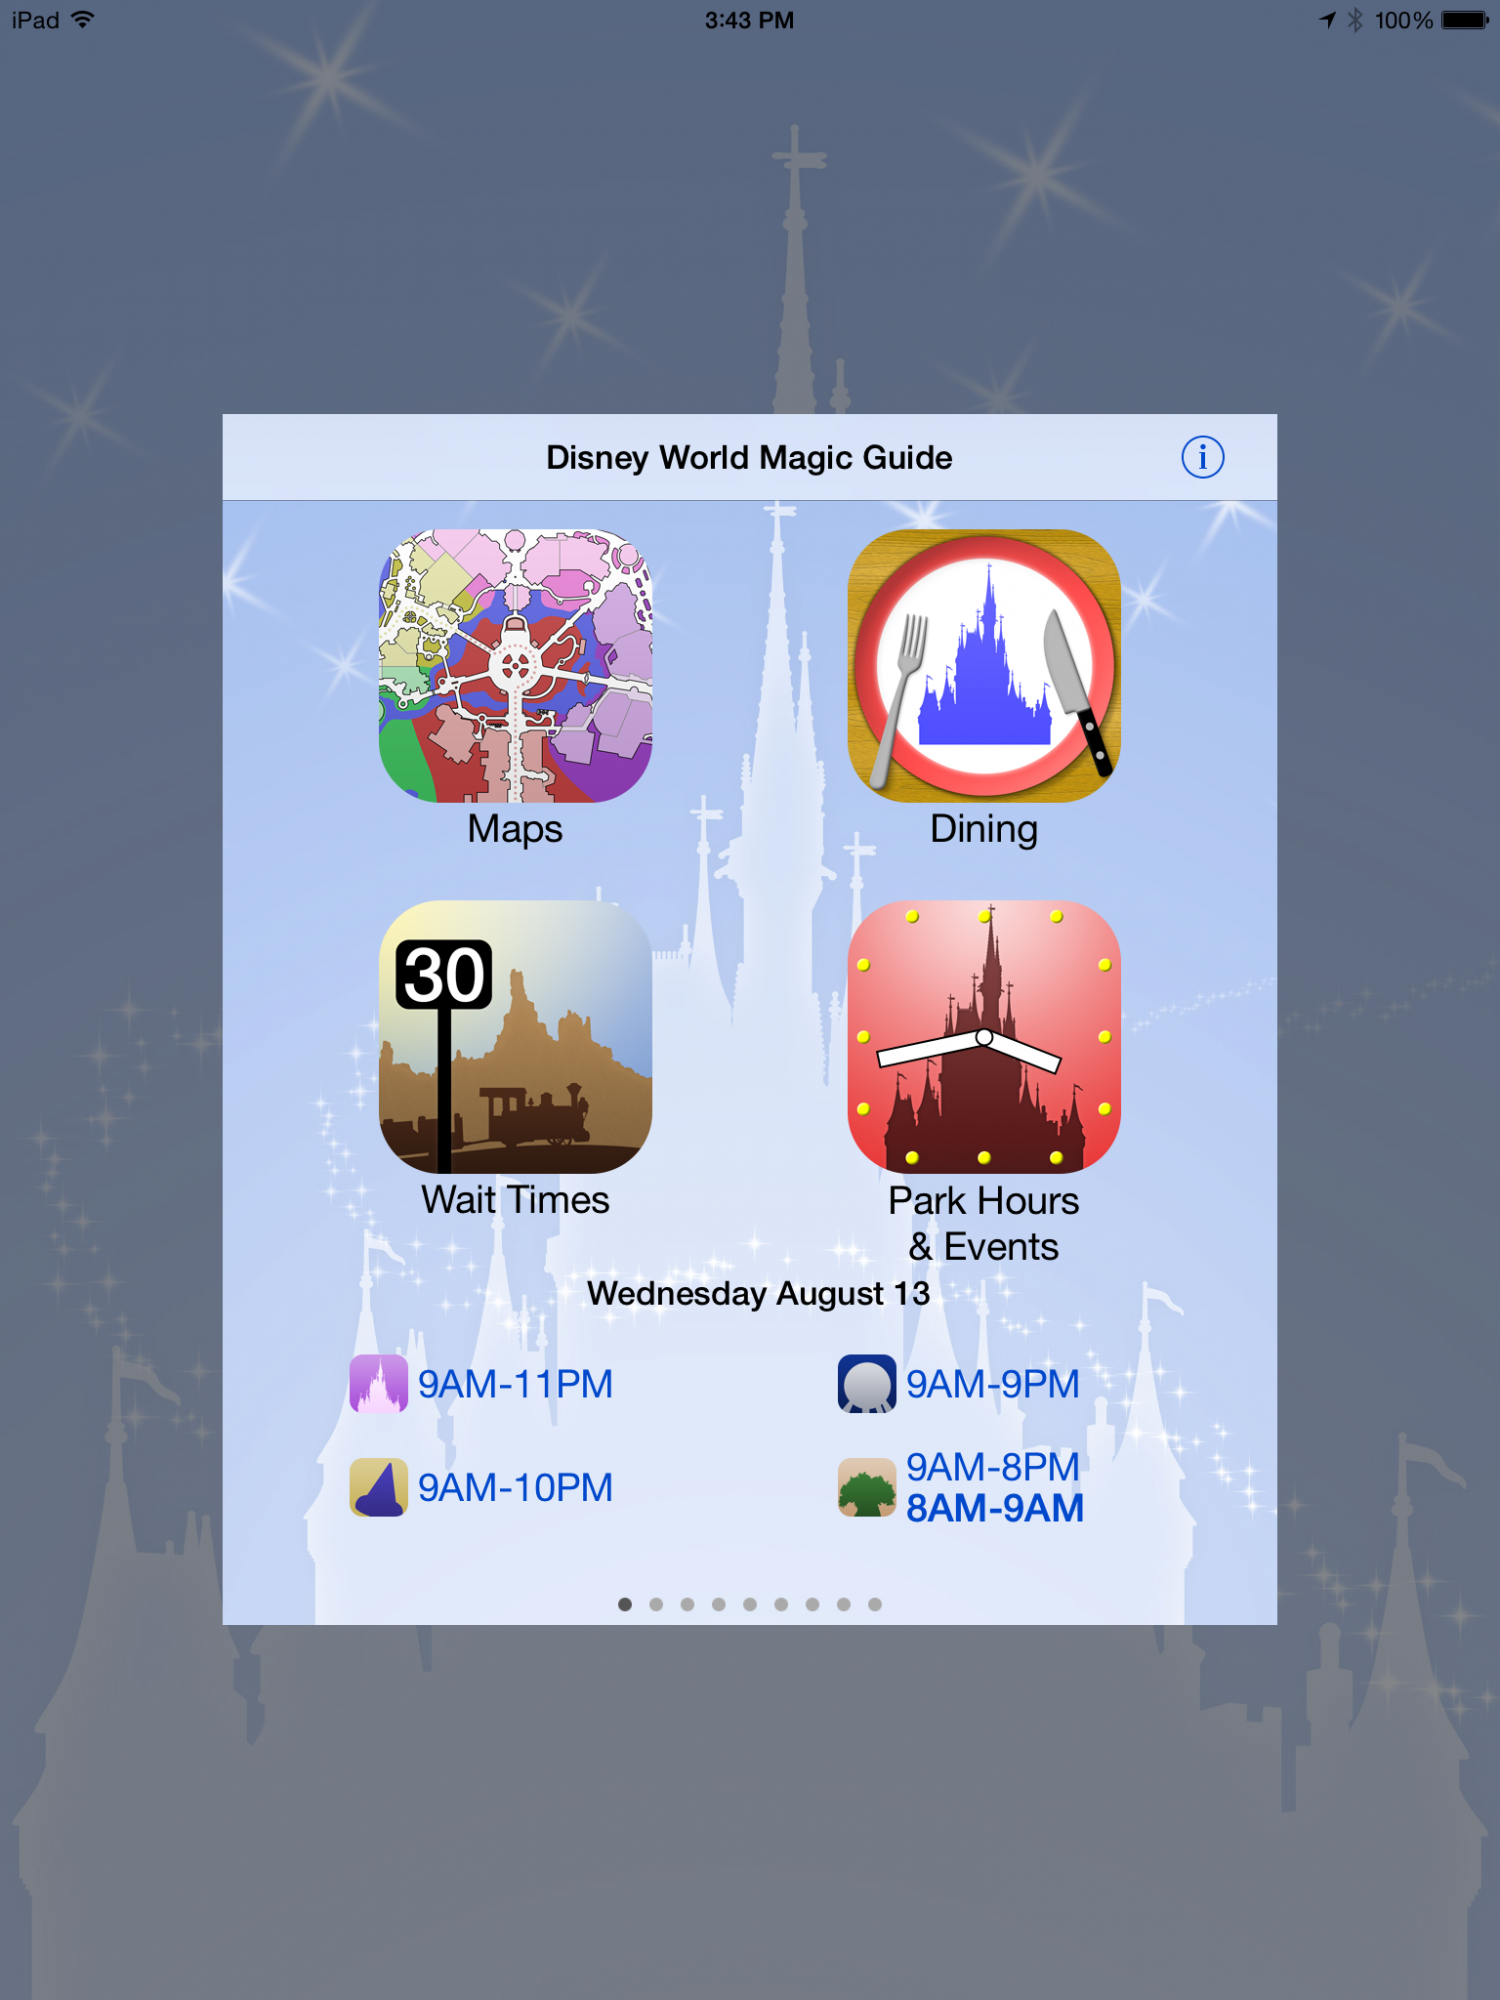 Learn which smartphone apps can help plan your Disney vacation | PassPorter.com